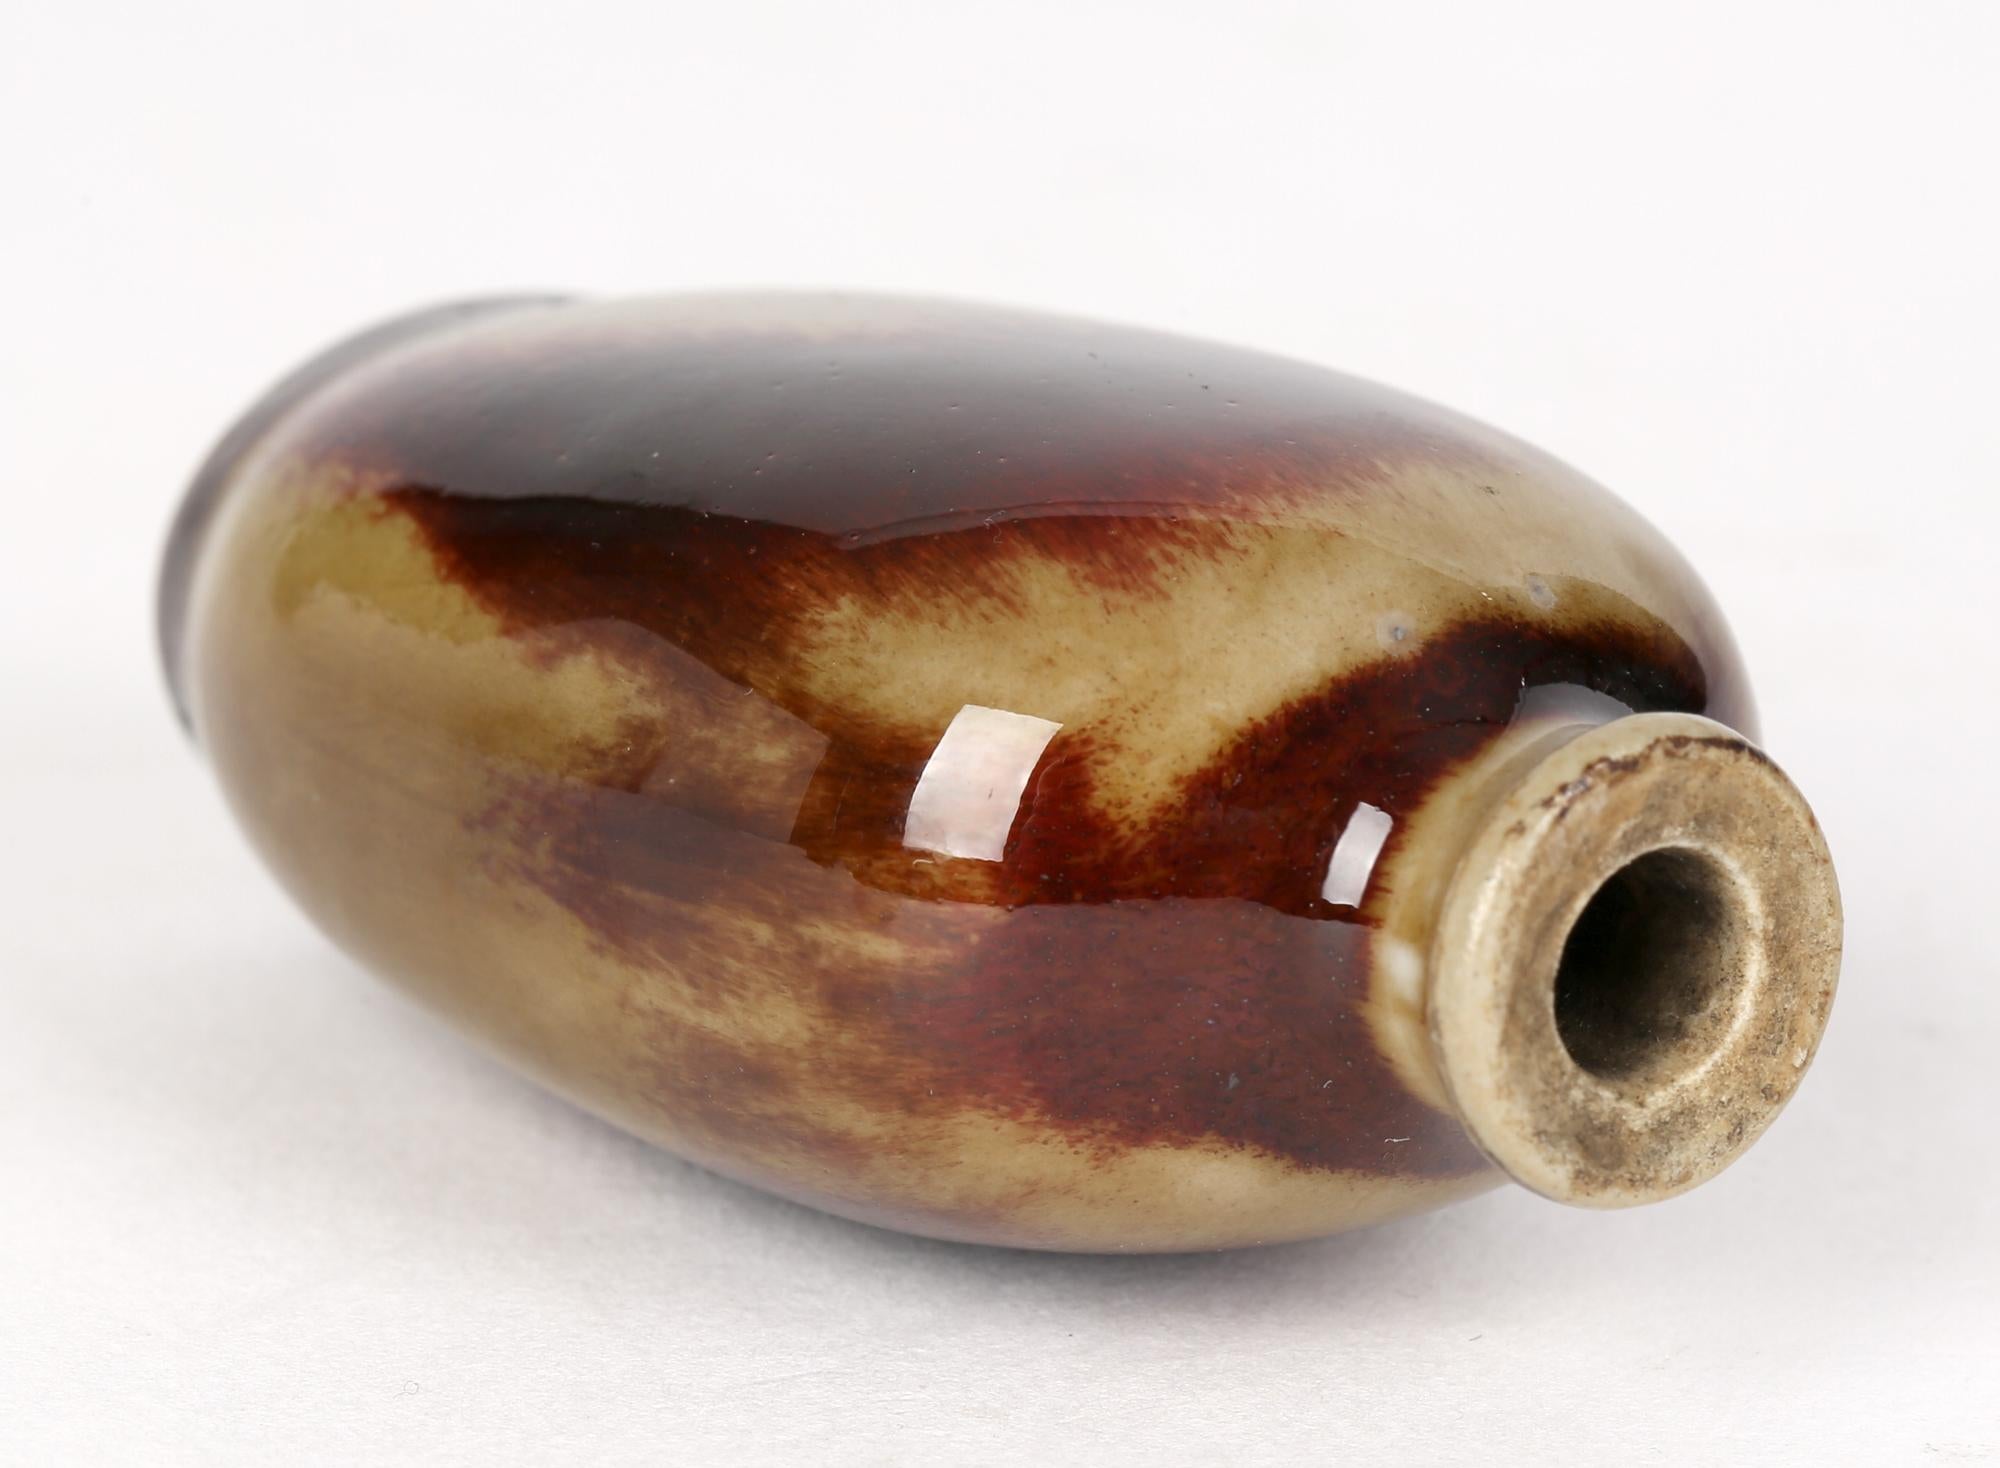 dating brown snuff bottles